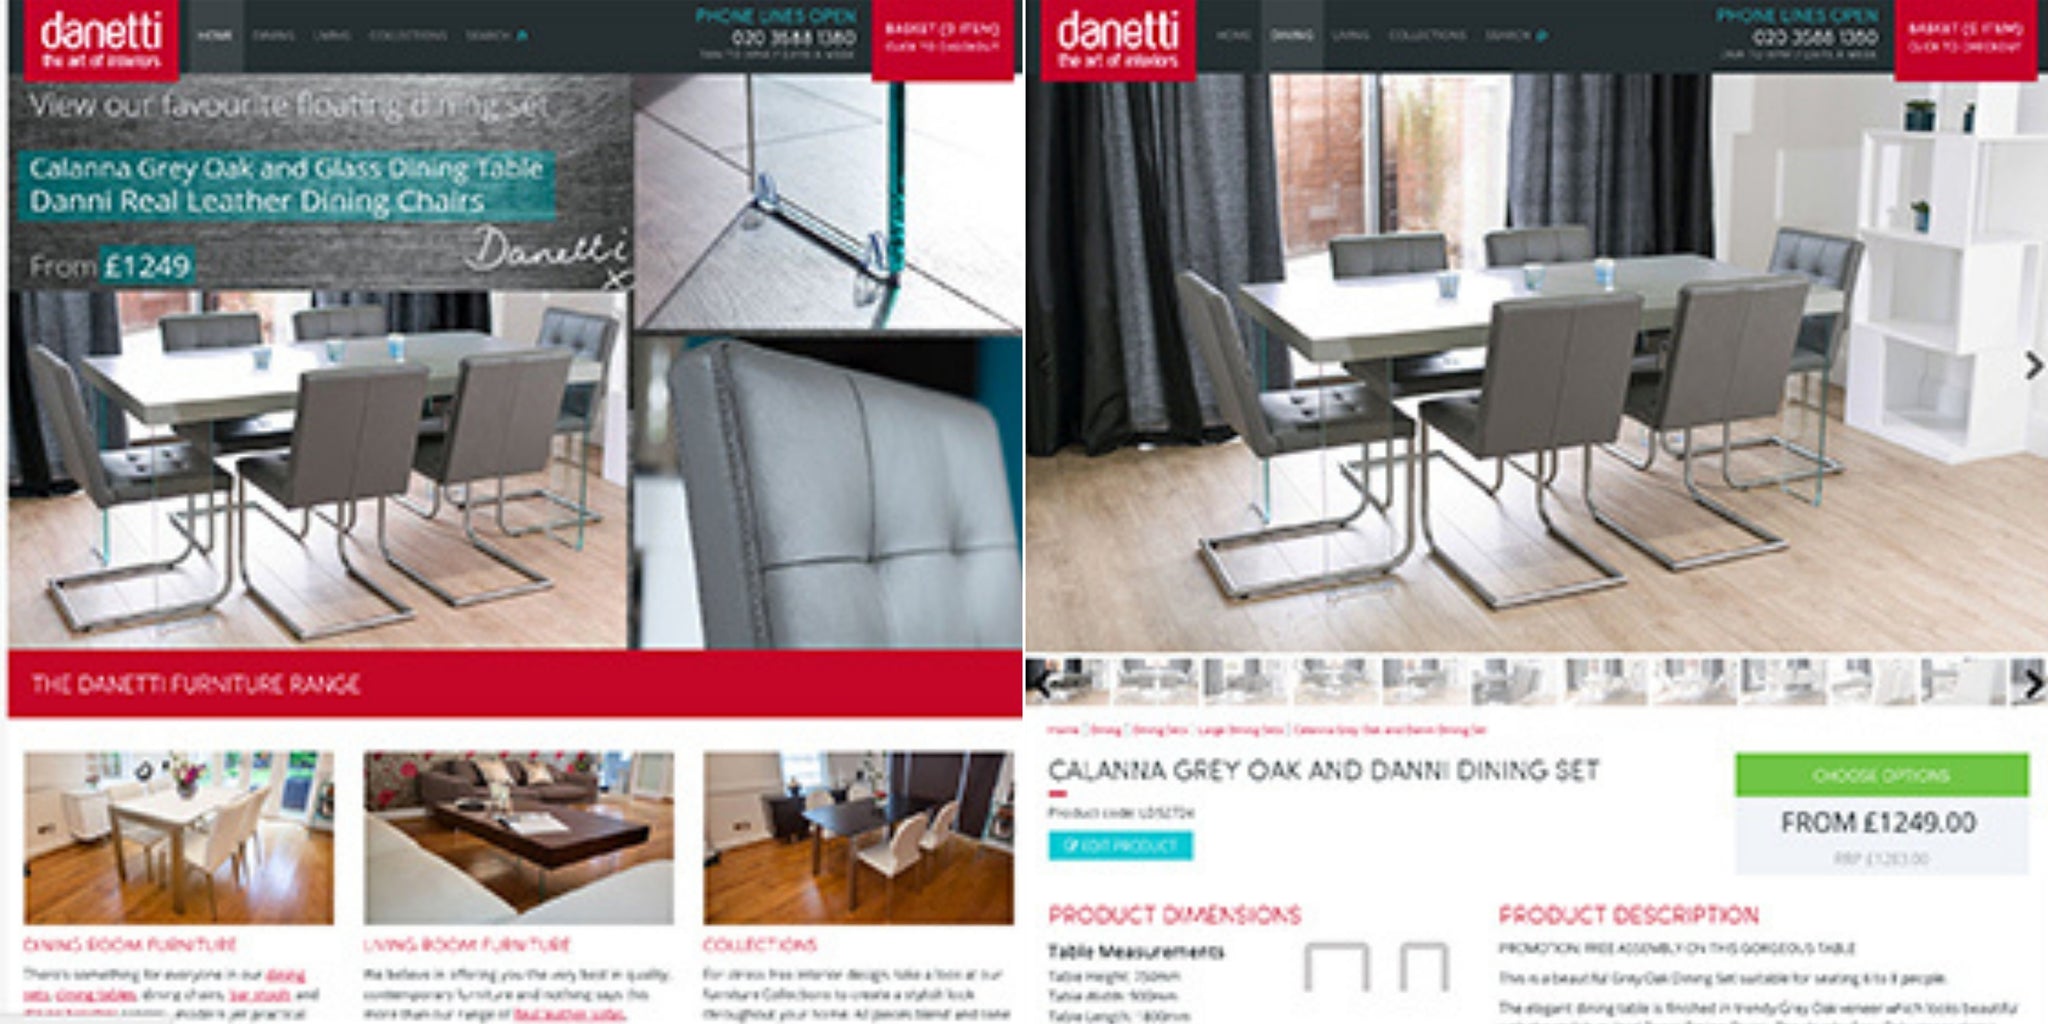 Welcome to the Brand New Danetti Website!